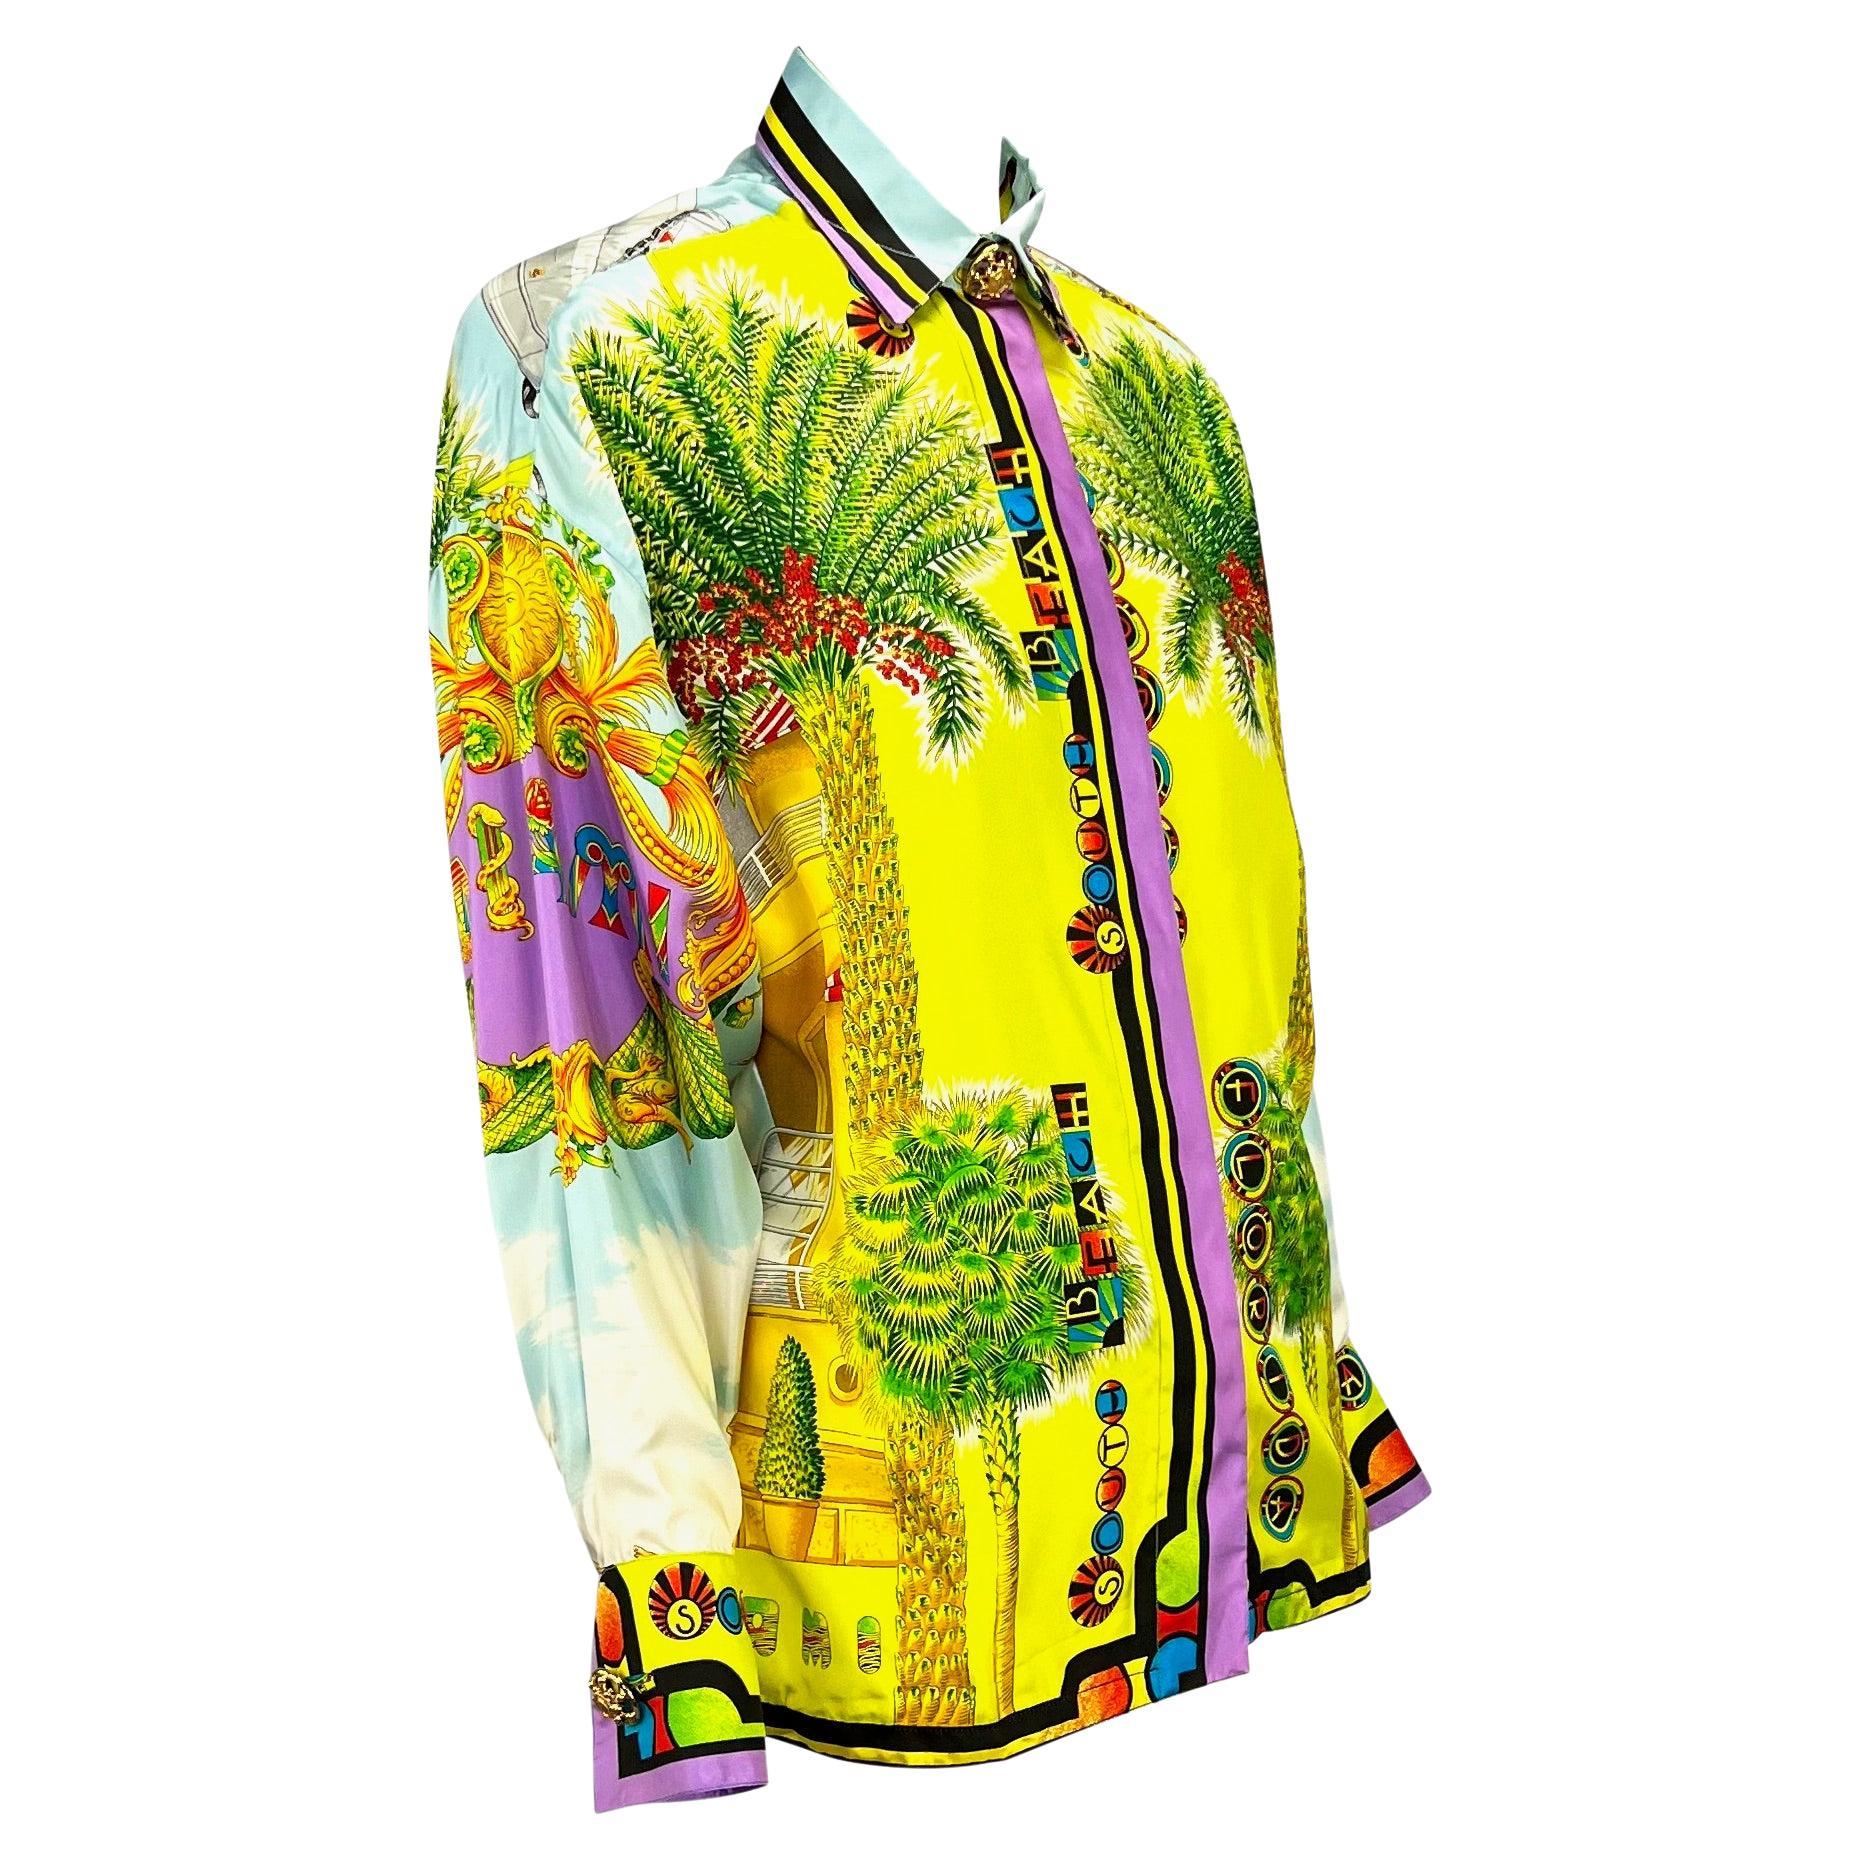 S/S 1993 Gianni Versace Couture Miami South Beach Print Shoulder Pad Button Down 4